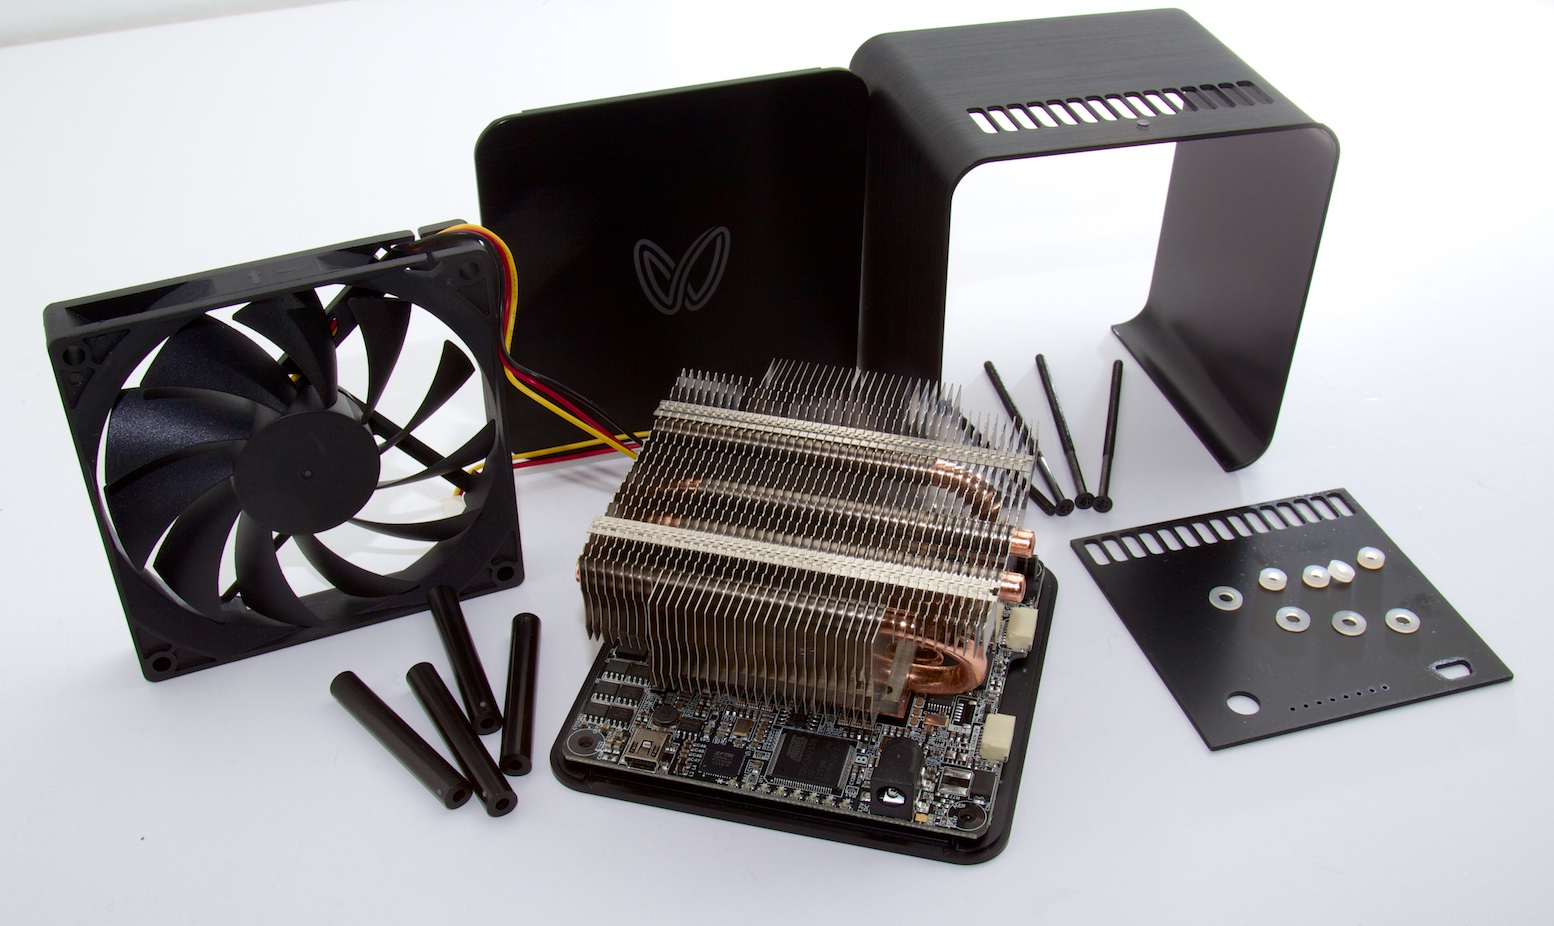 butterfly labs bitcoin miner)